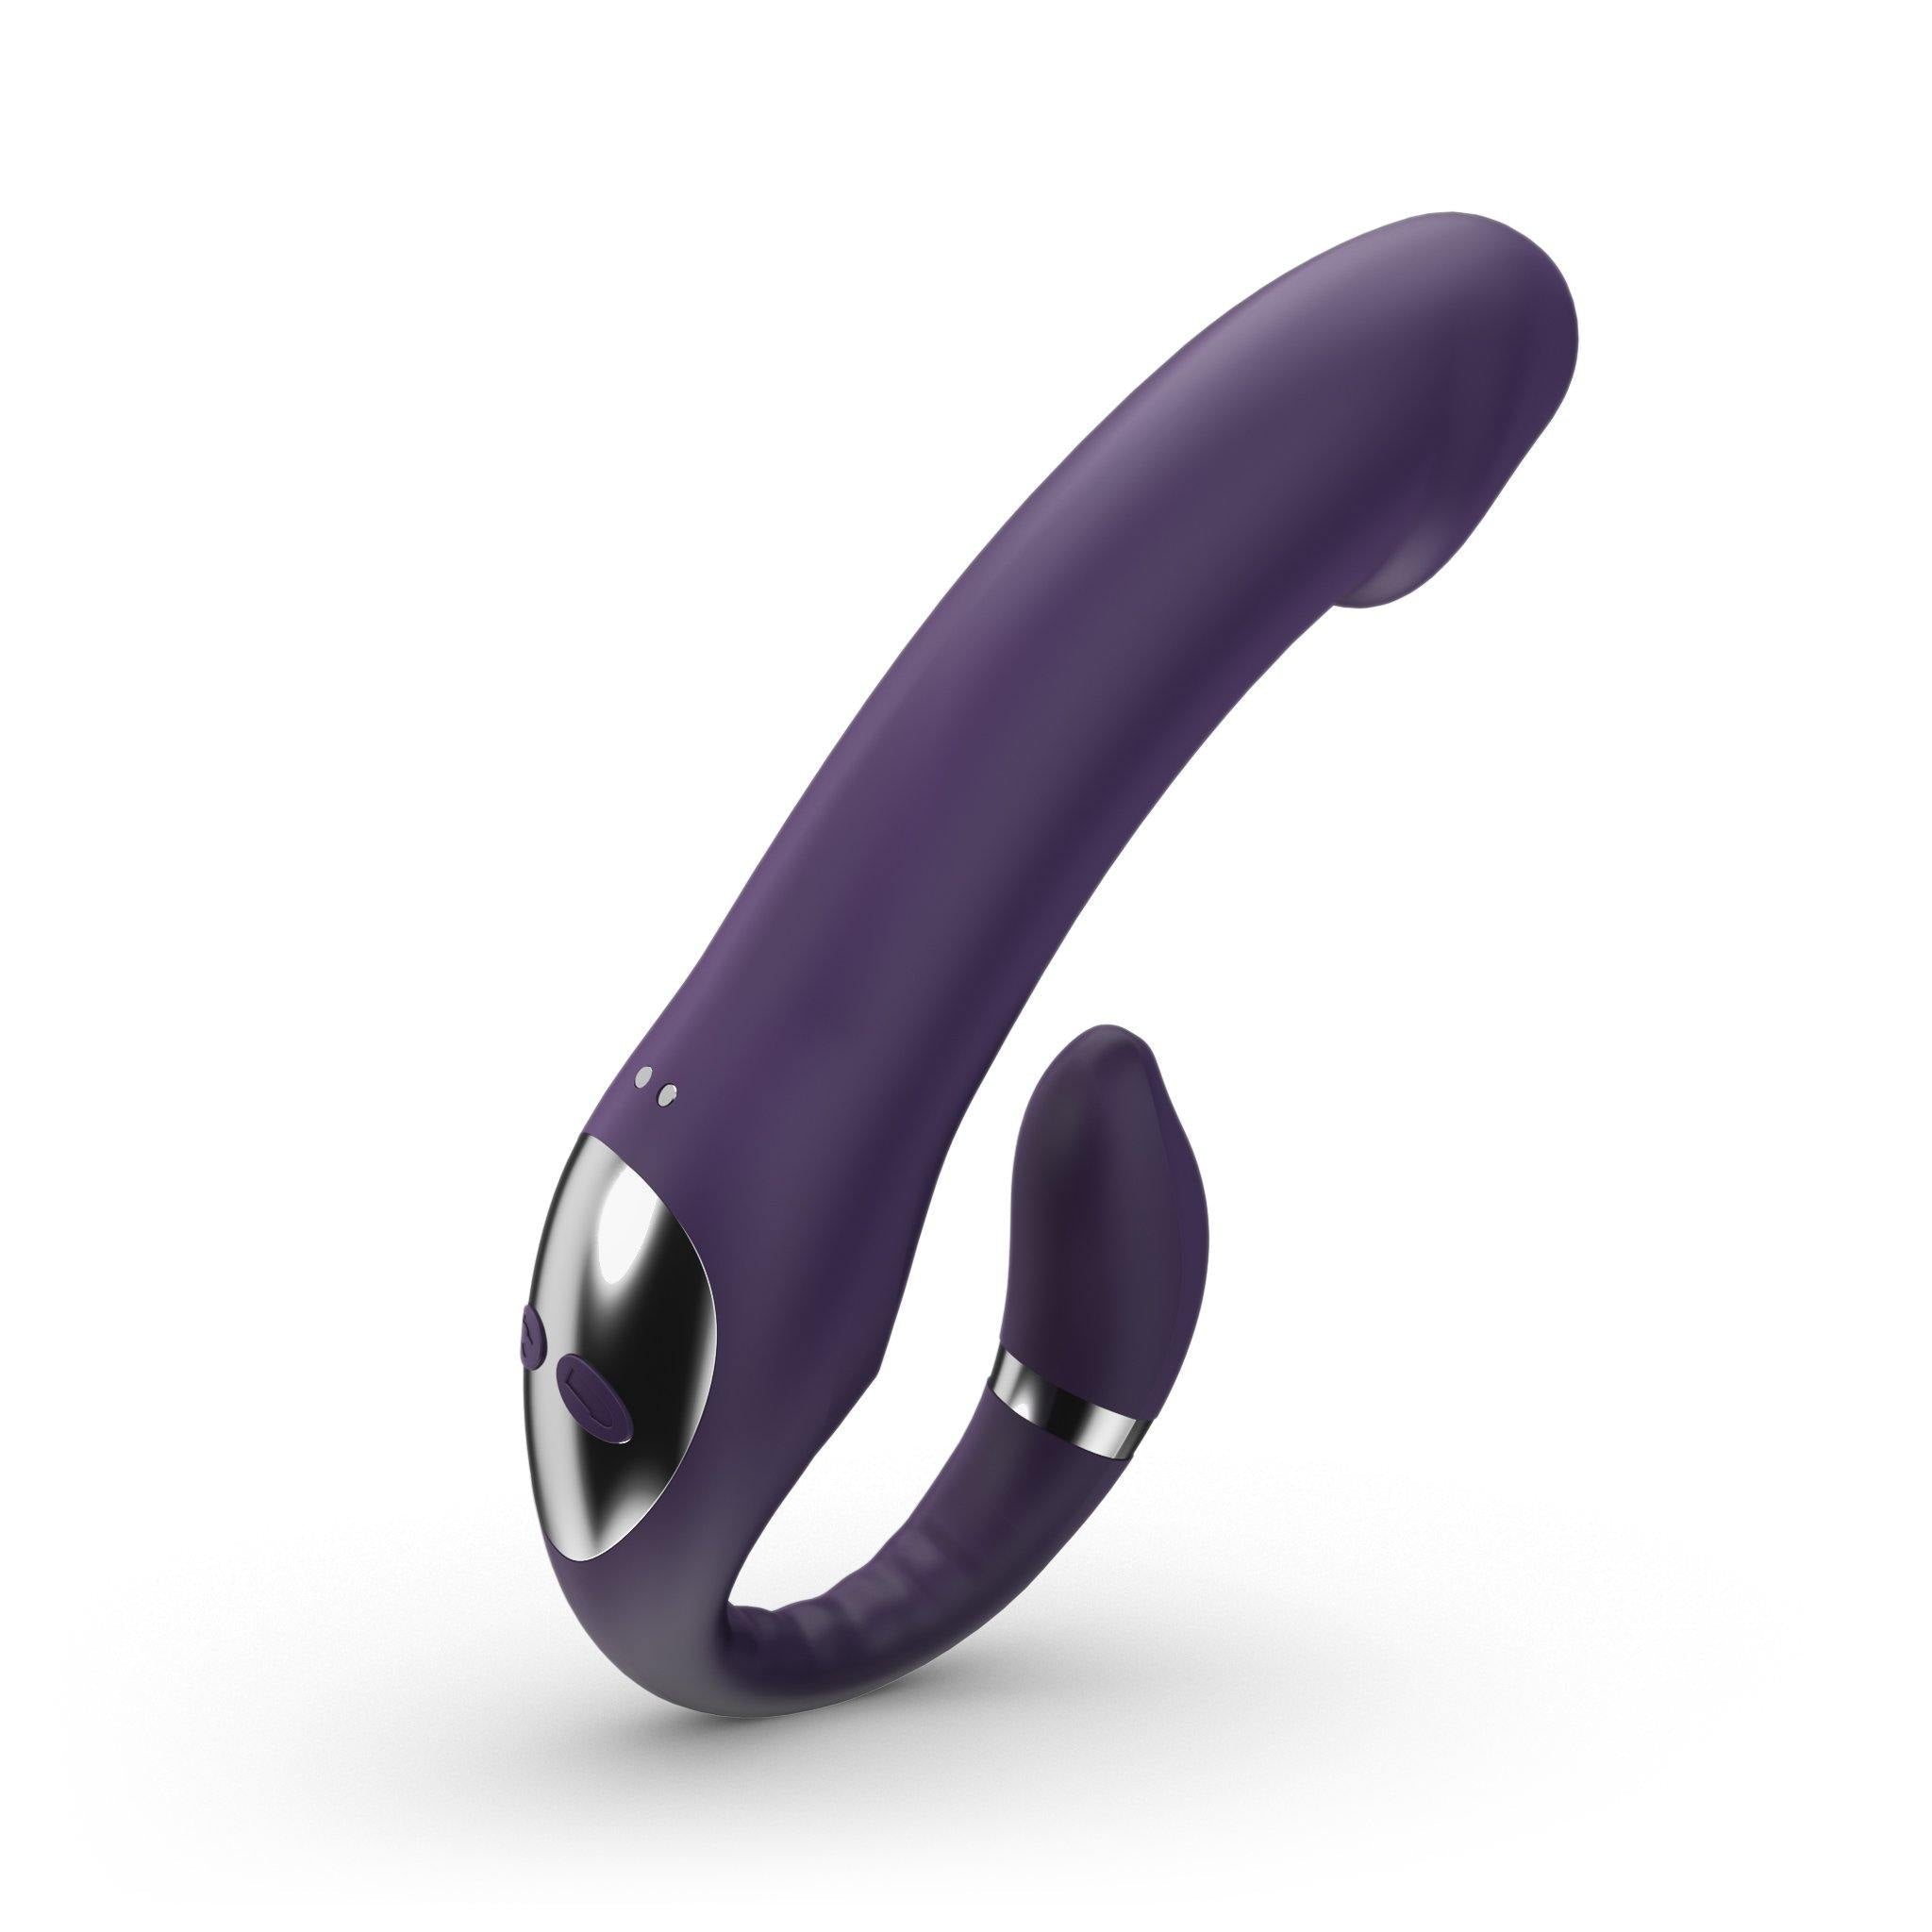 Double-E Vibrator G-Spot toy, 10 Different vibration, 10 Different vibration modes in the tail partial, Special Rotation modes in the head for more stimulation, Ergonomically design for hit your elusive pleasure zone, Body-safe, waterproof, and odorless silicon, USB Quickly charge for pleasure whenever you want